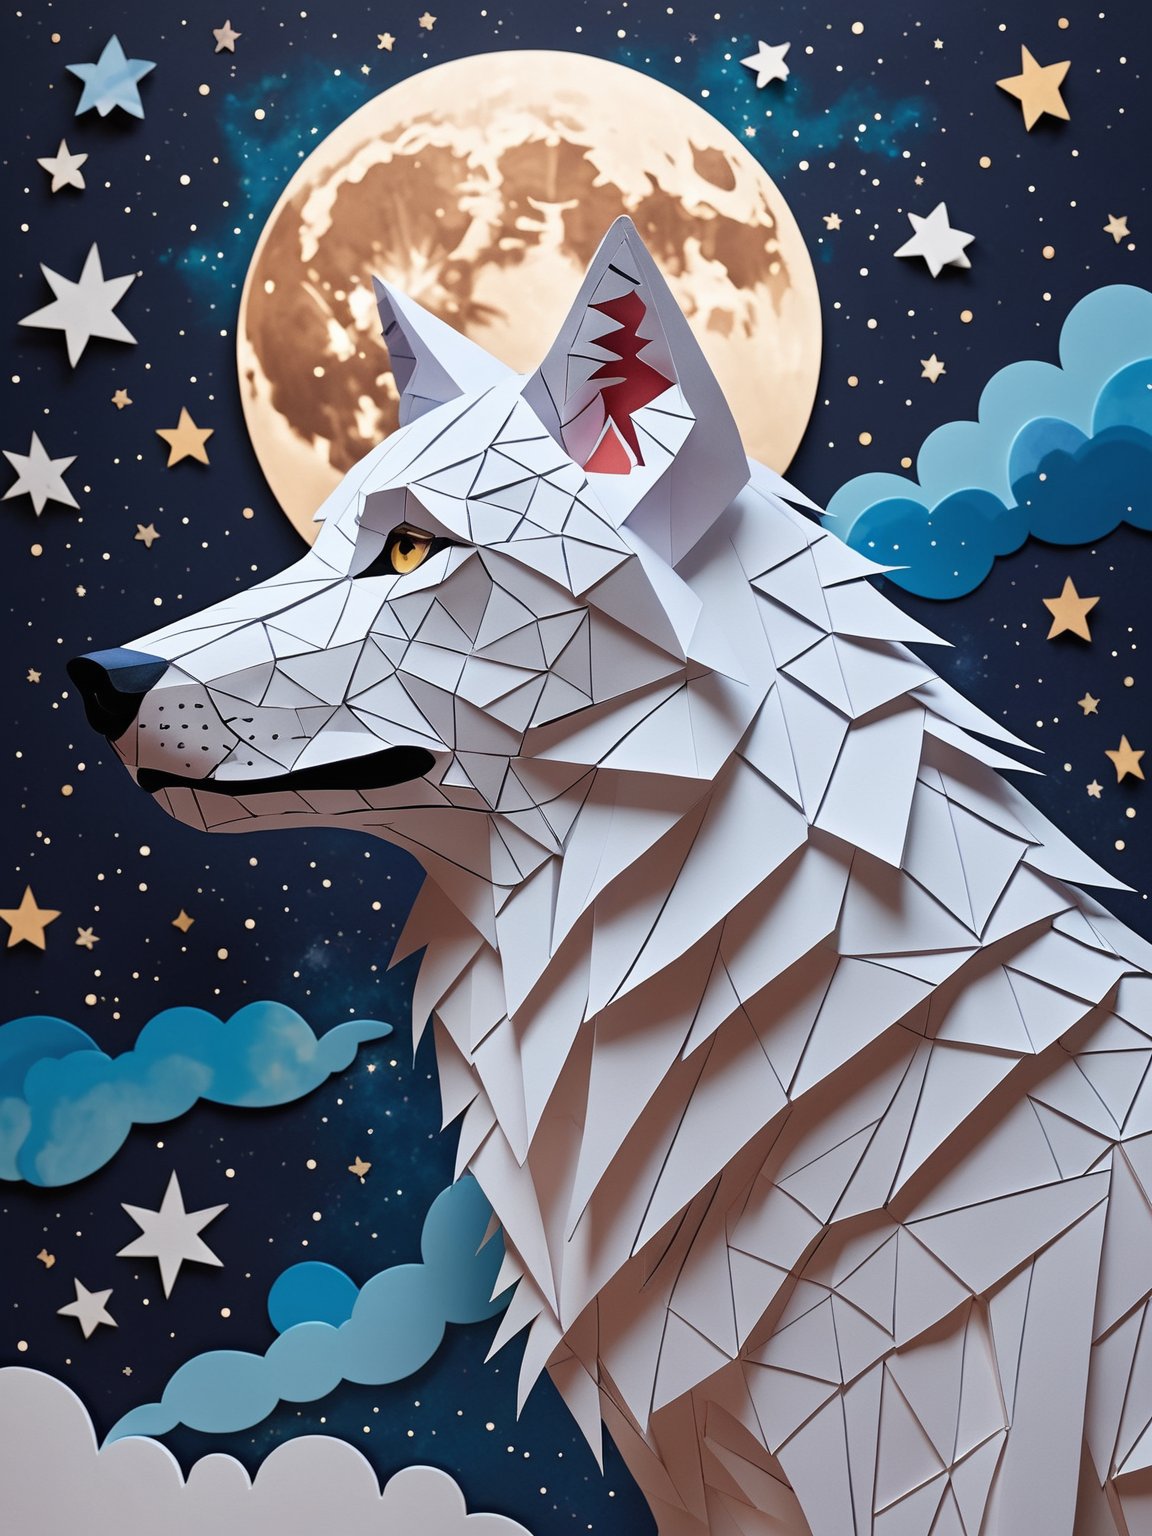 a wolf made of paper in the sky with constellations and the moon and stars and nebulas